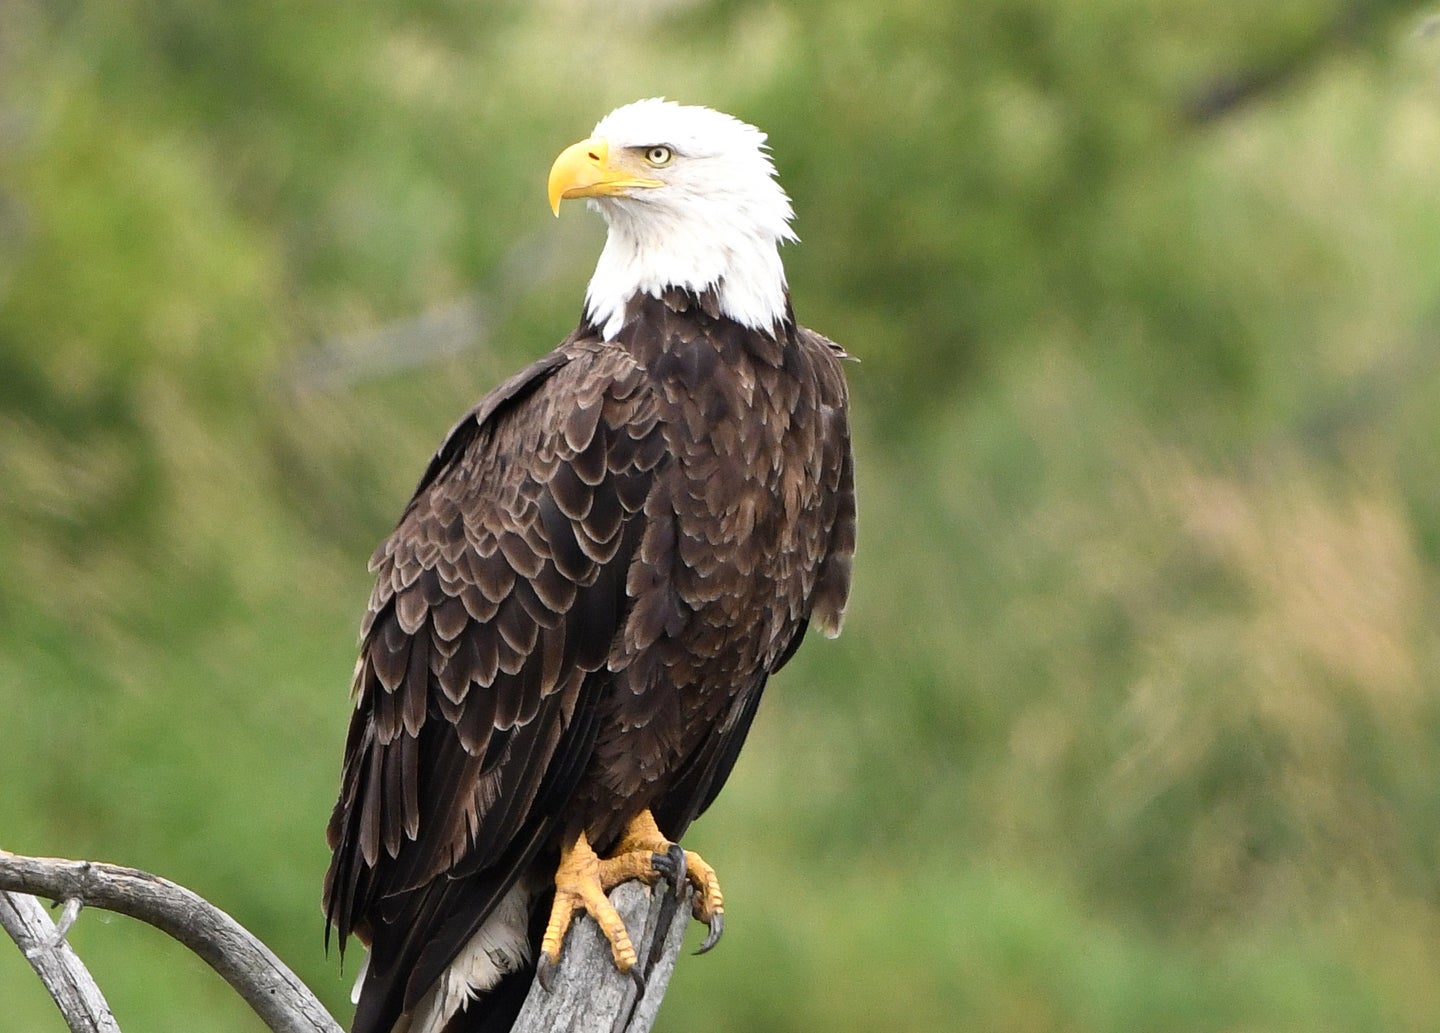 a bald eagle perched on a branch